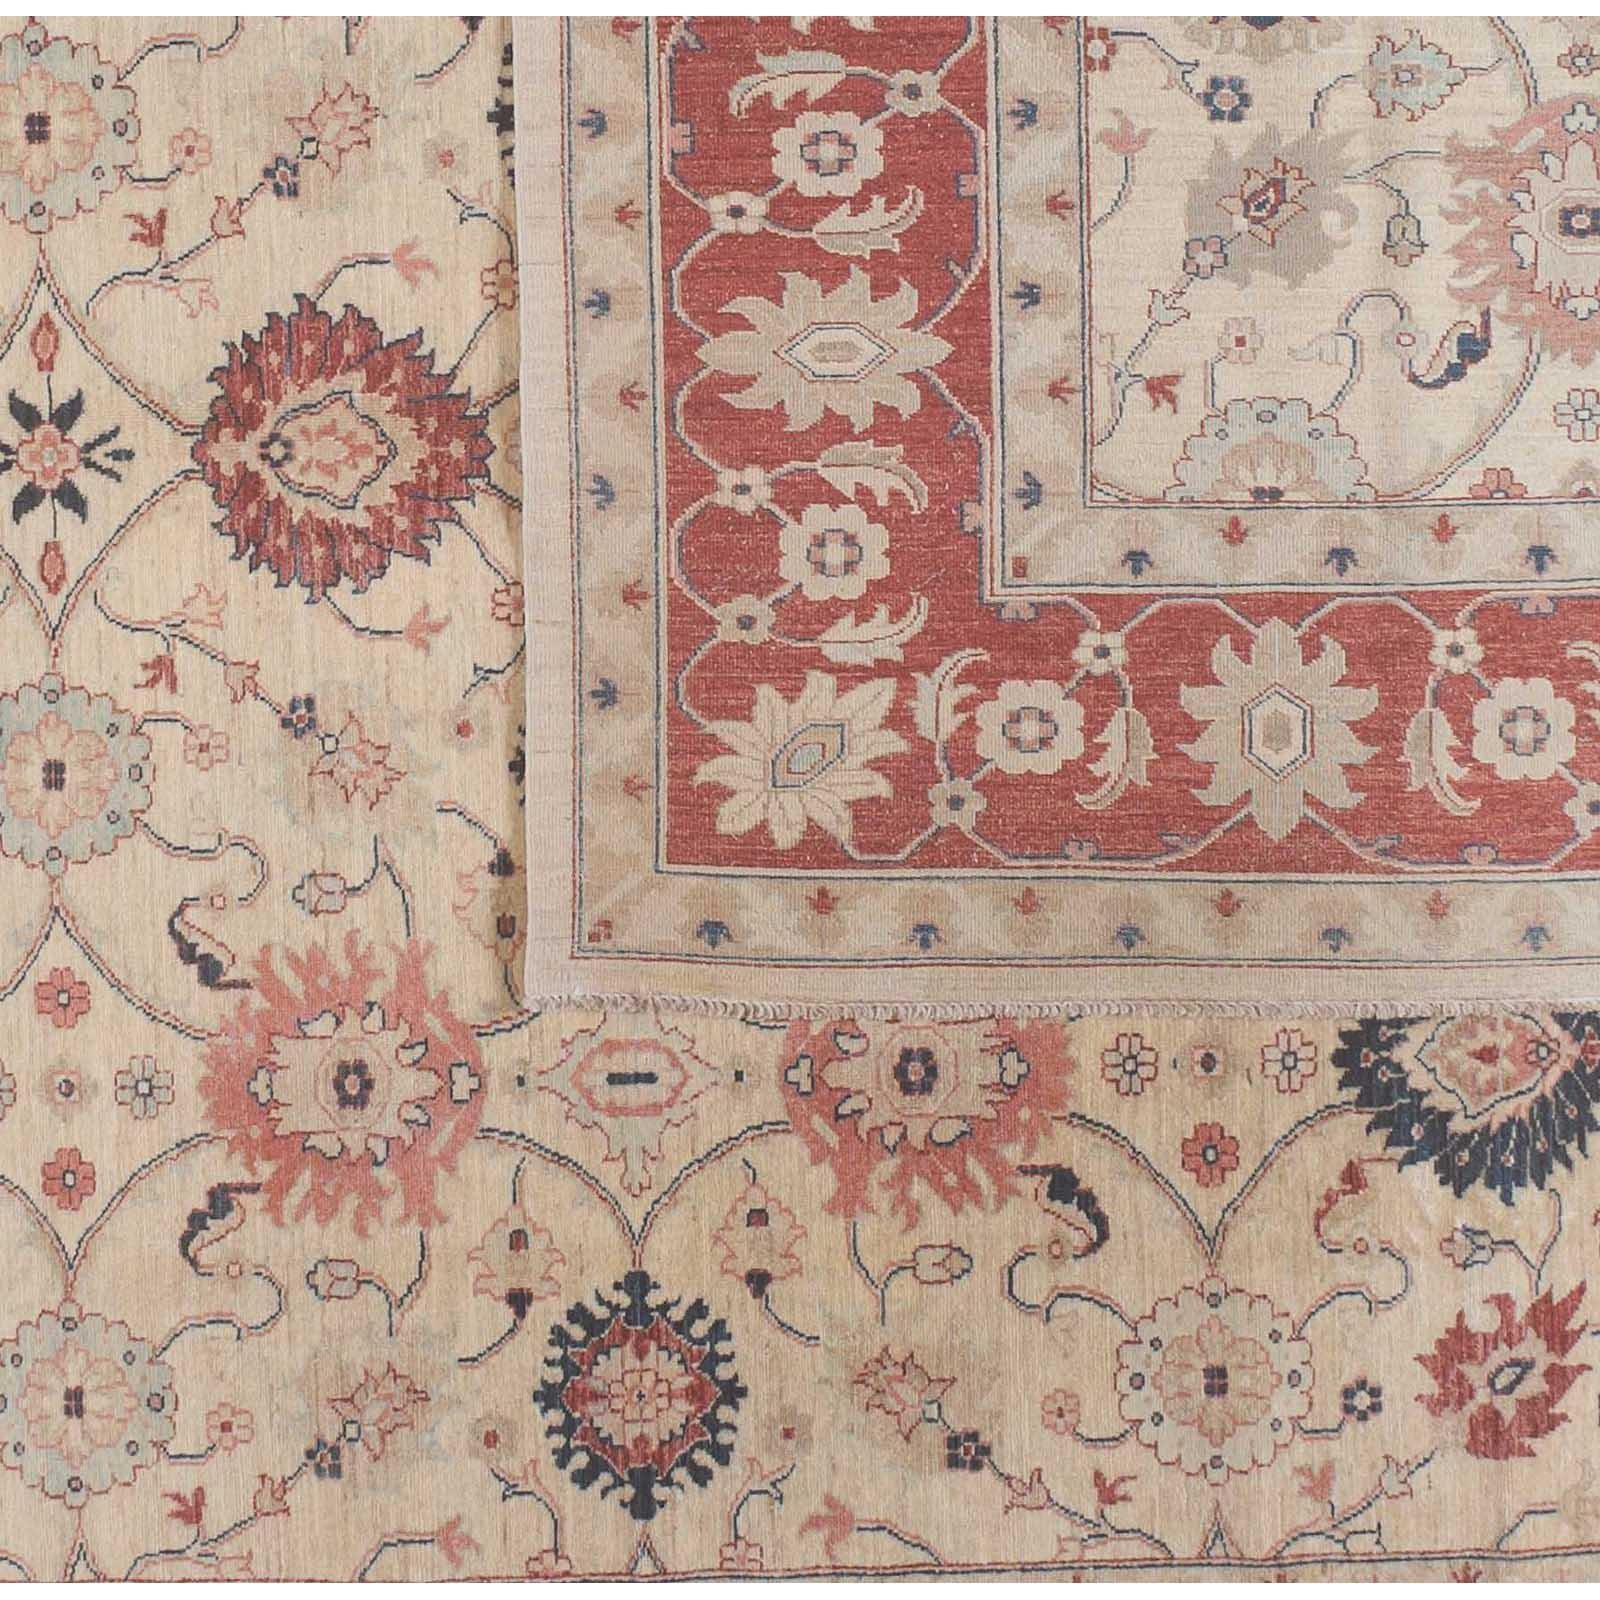 A bold red border surrounds a beige floral center in this traditional Pakistani design. Red, coral, teal and taupe flowers delight without distracting in a piece with lovely balance and proportion. Wool. Hand knotted in Pakistan using vegetal dyes.